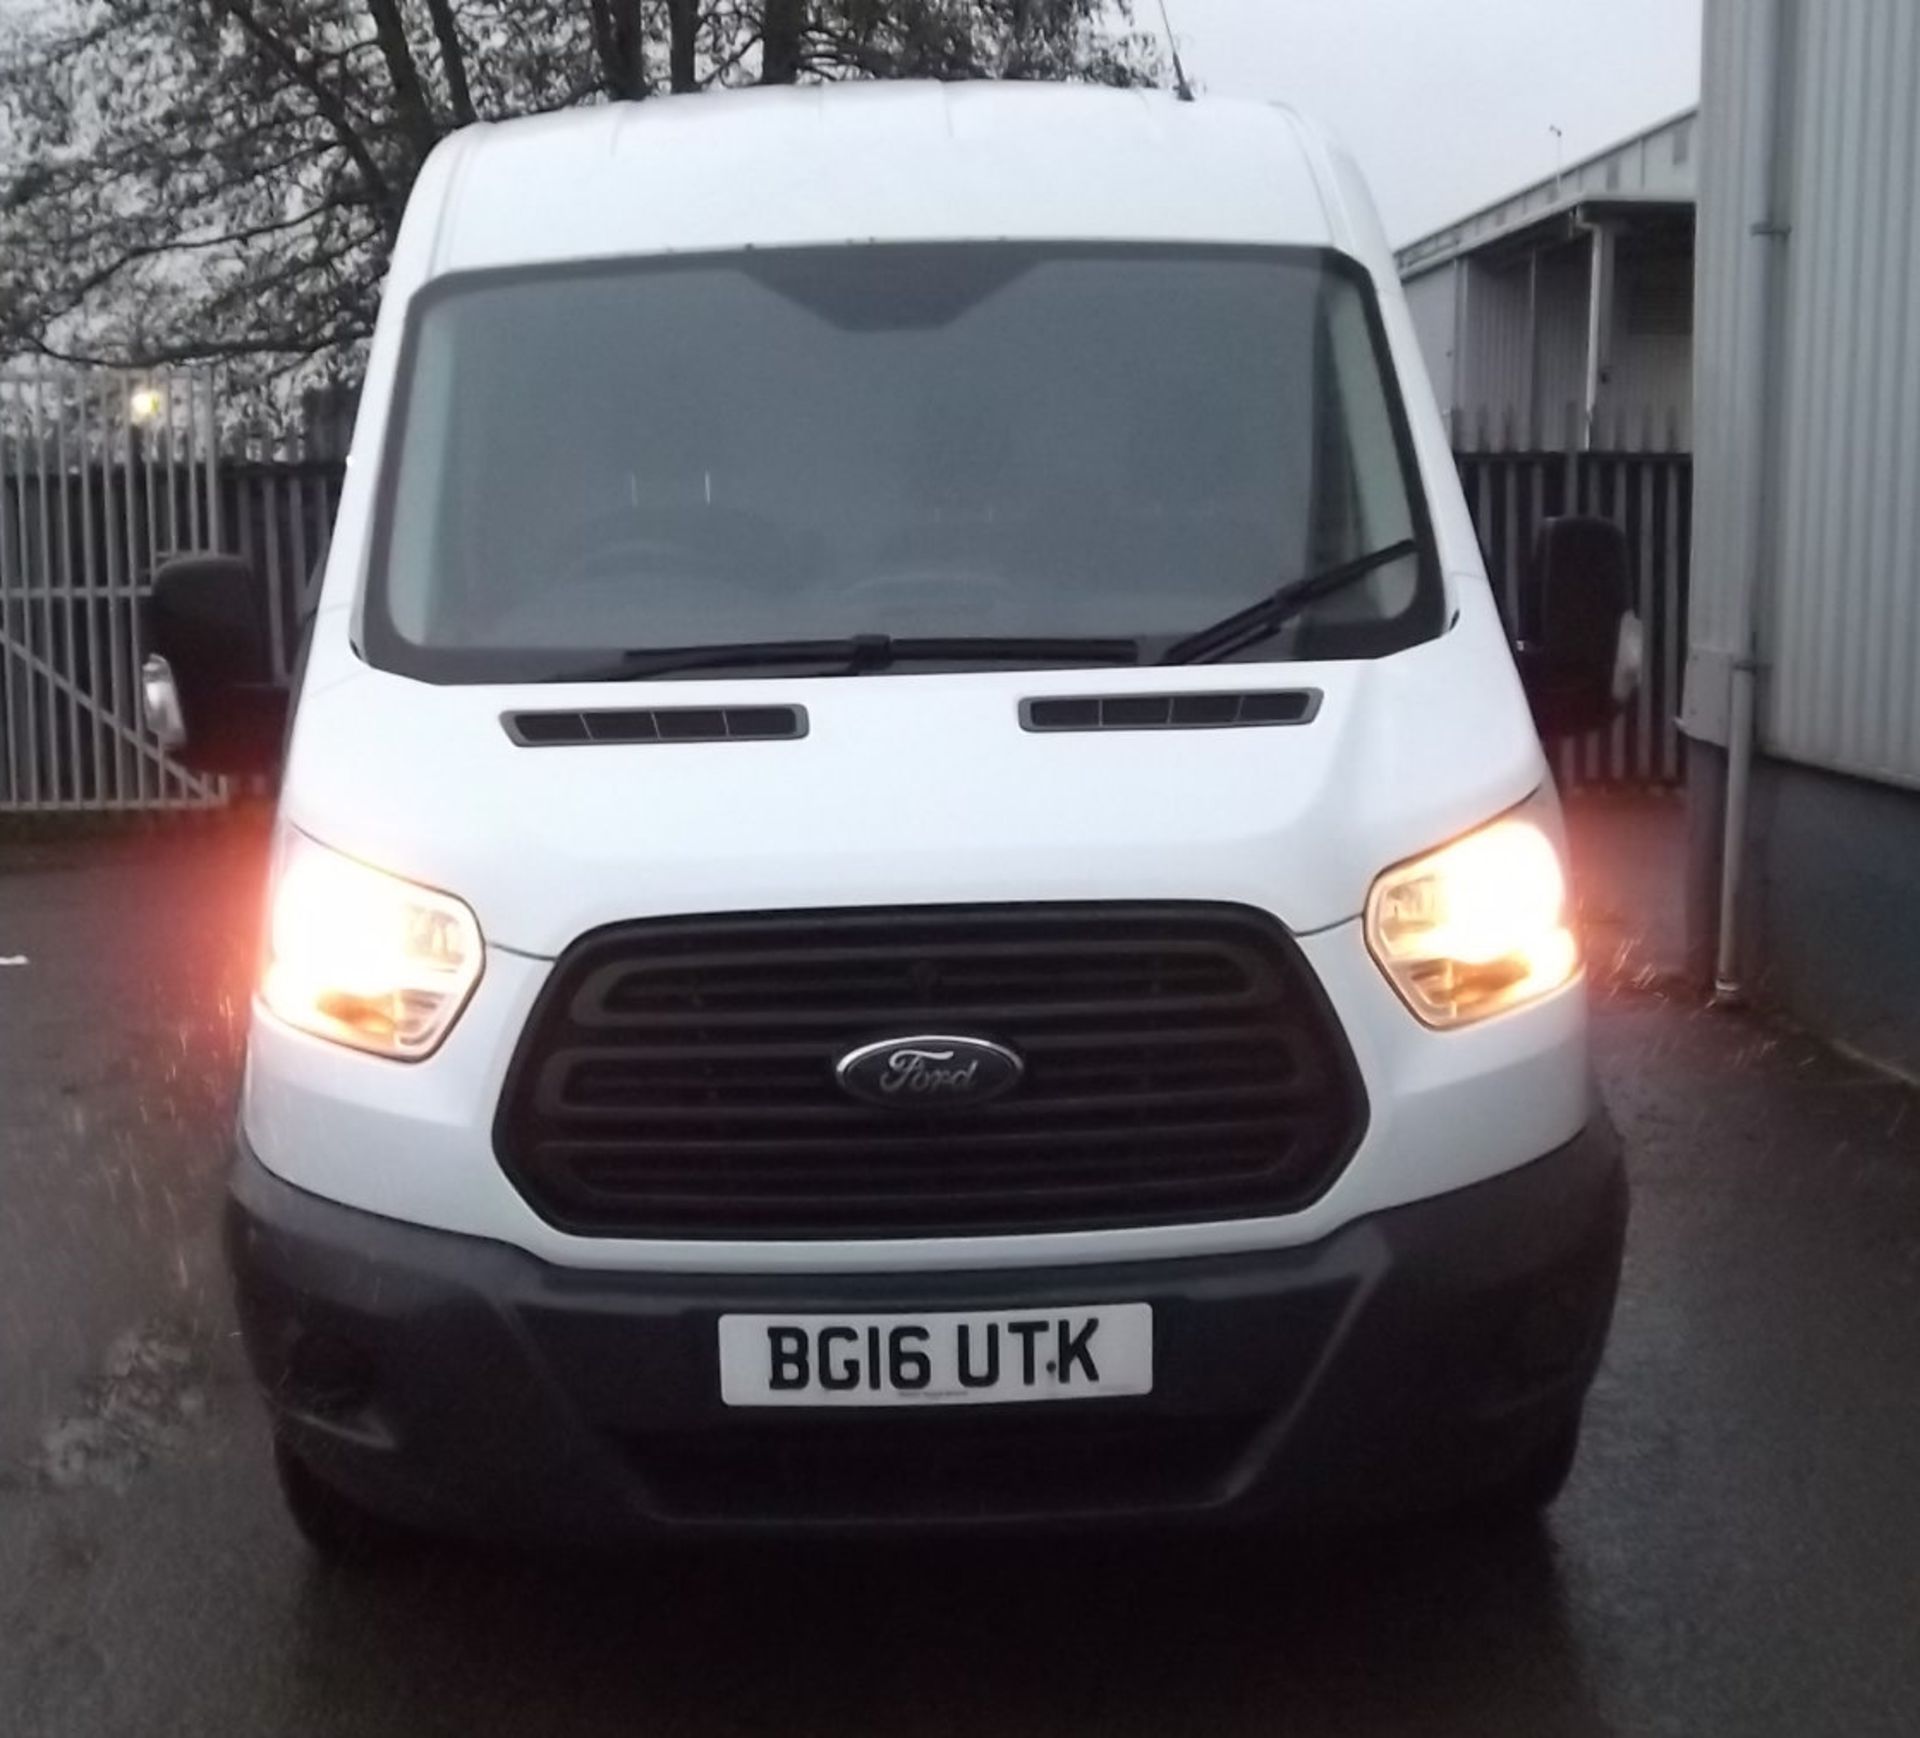 2016 Ford Transit 350 2.2 TDCi 125ps H2L3 Panel Van - CL505 - Location: Corby, Northamptonshire - Image 15 of 15